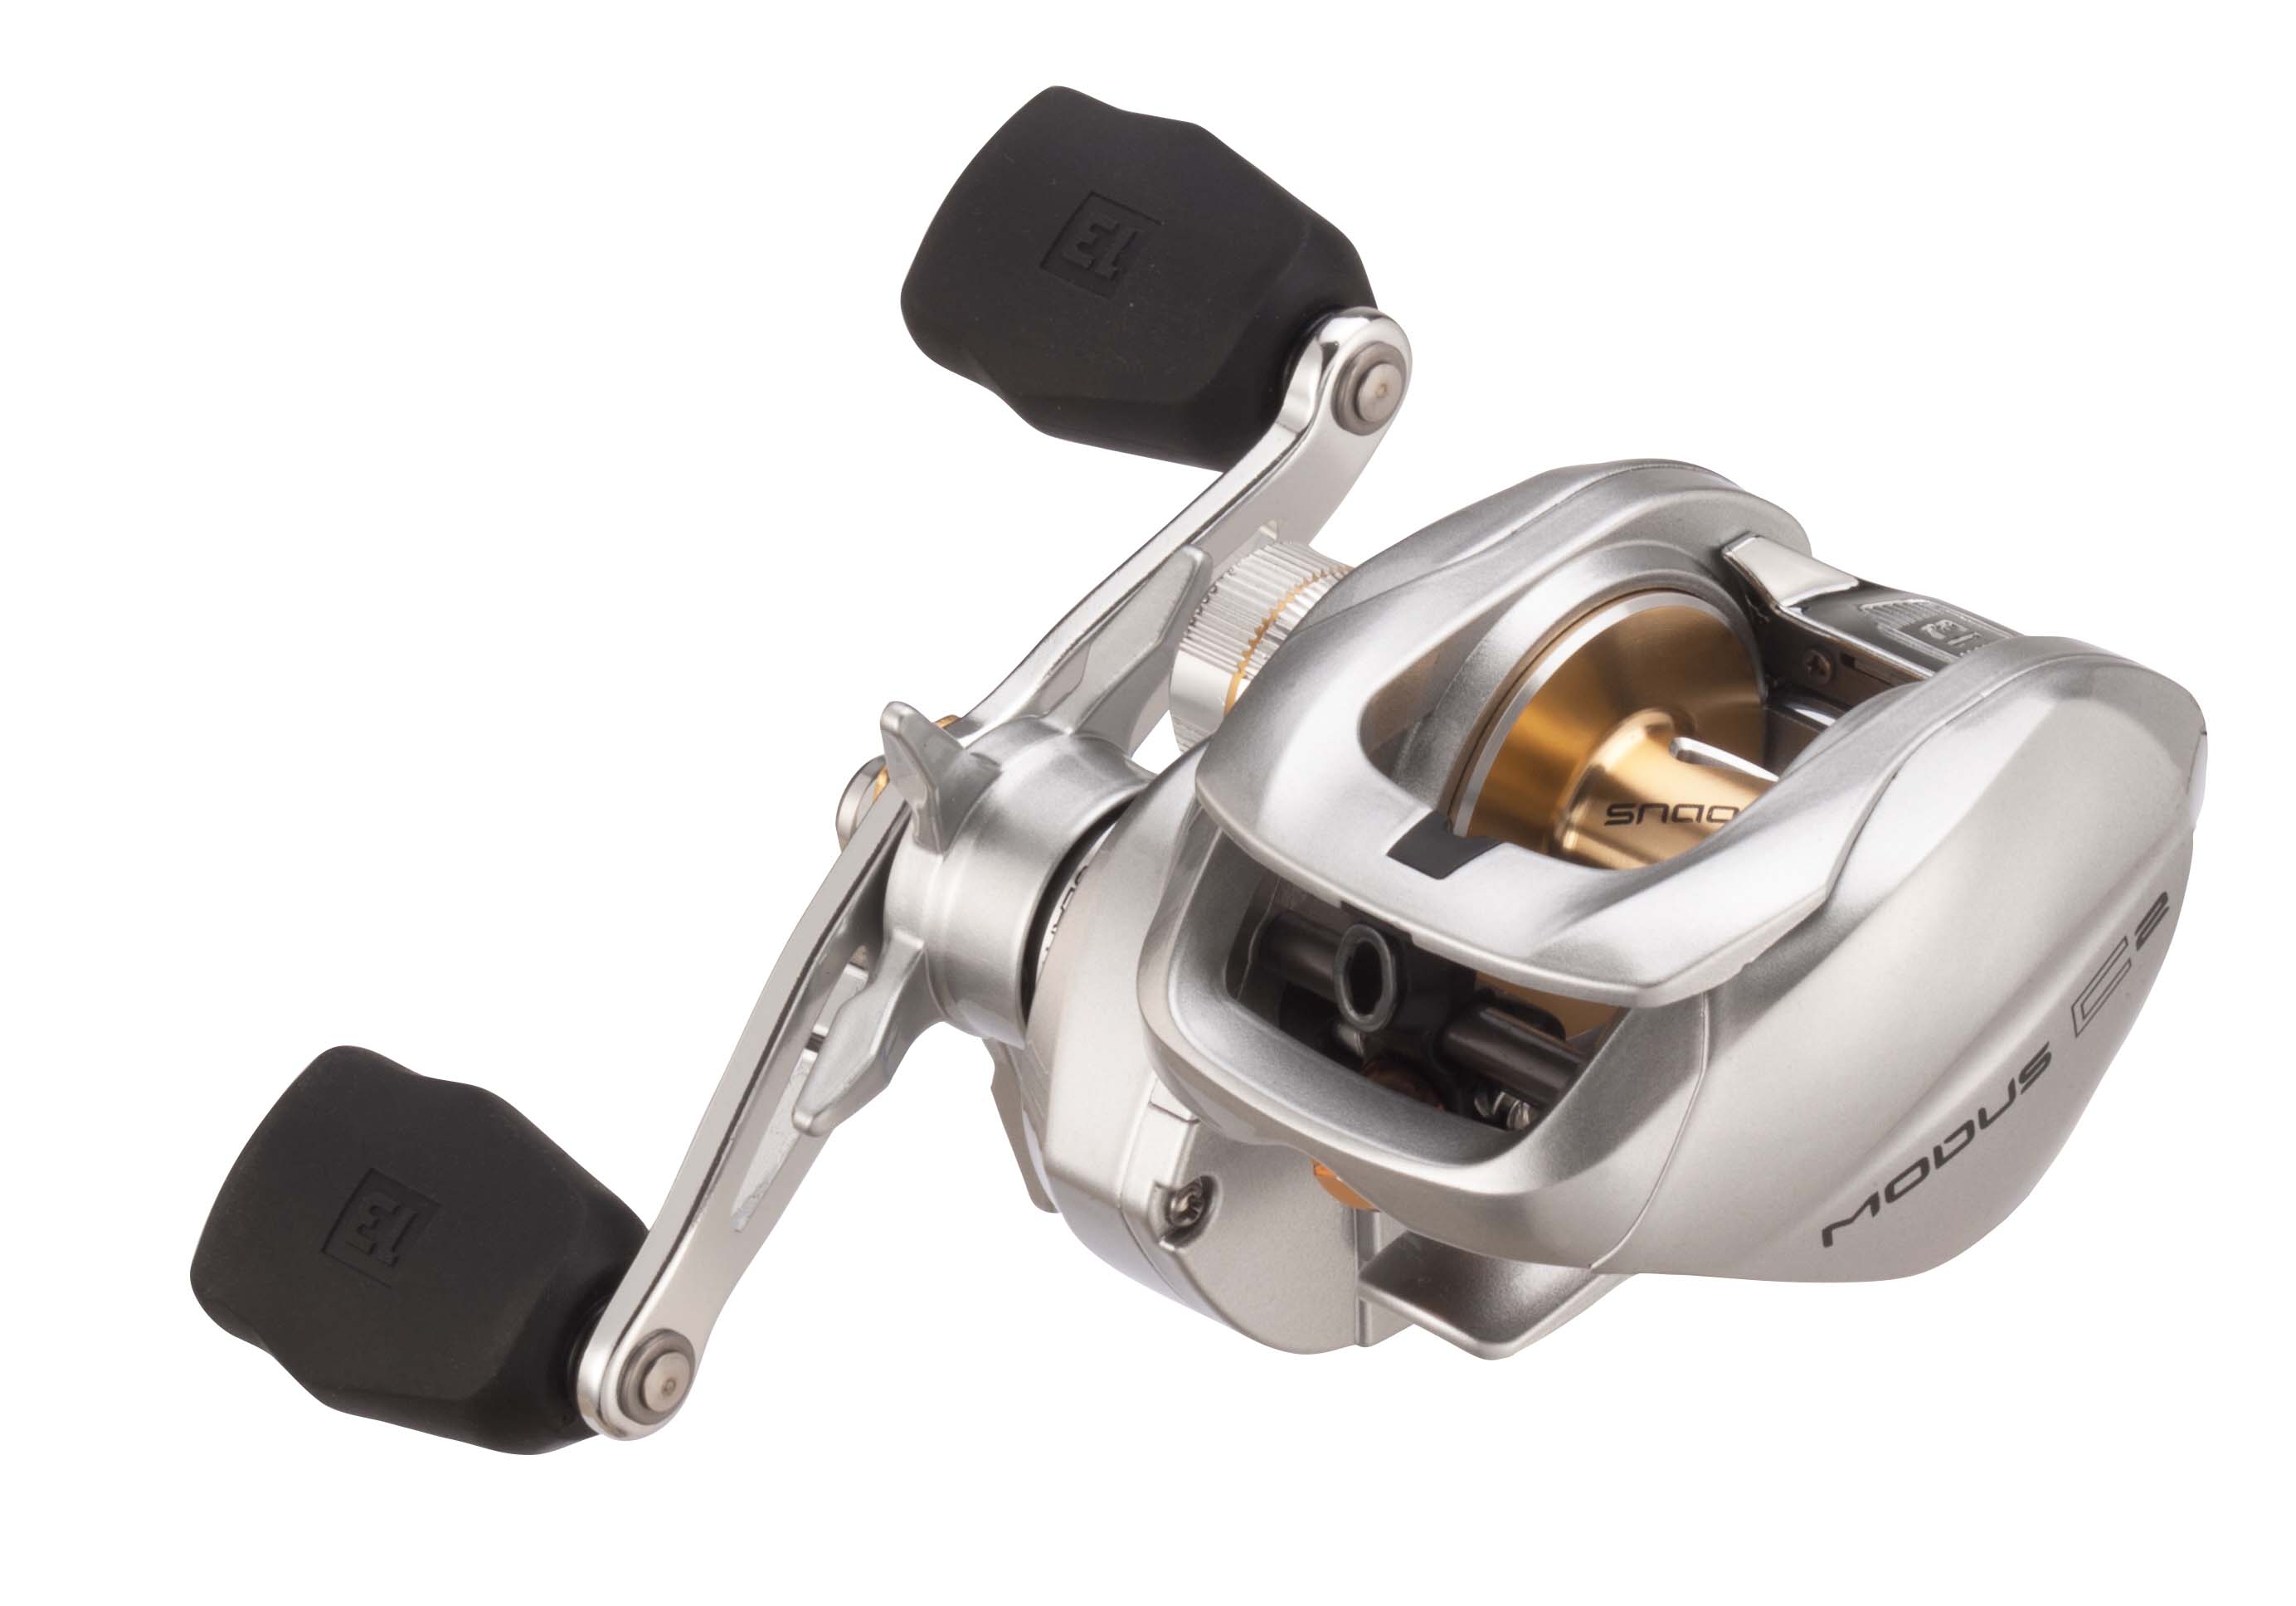 13 Fishing Modus C2 6.6:1 Baitcast Reel , Up to $10.60 Off with